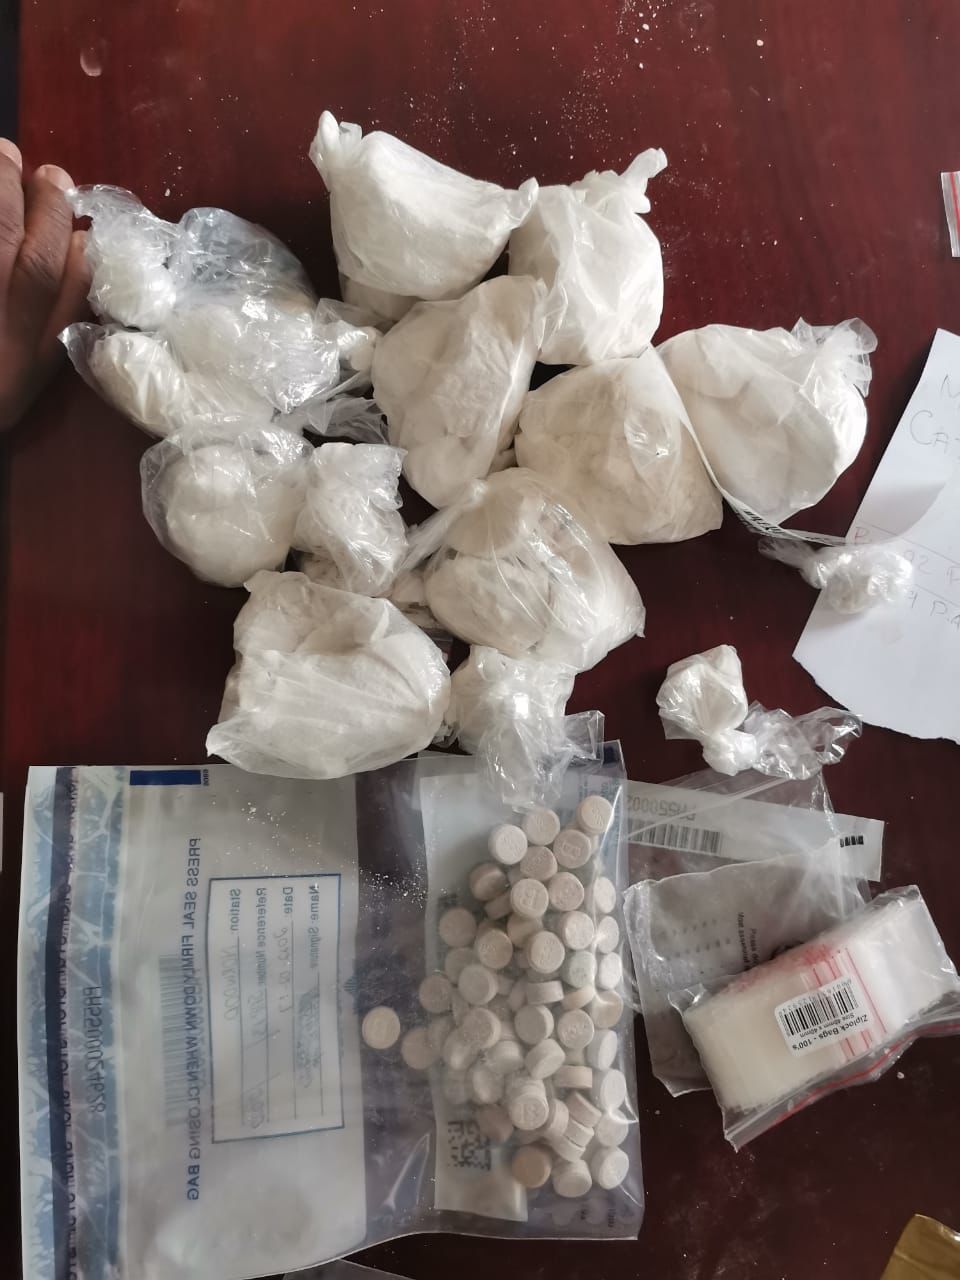 Detectives of Gauteng Organised Crime Investigations outsmart a suspected drug dealer and seize drugs with an estimated street value